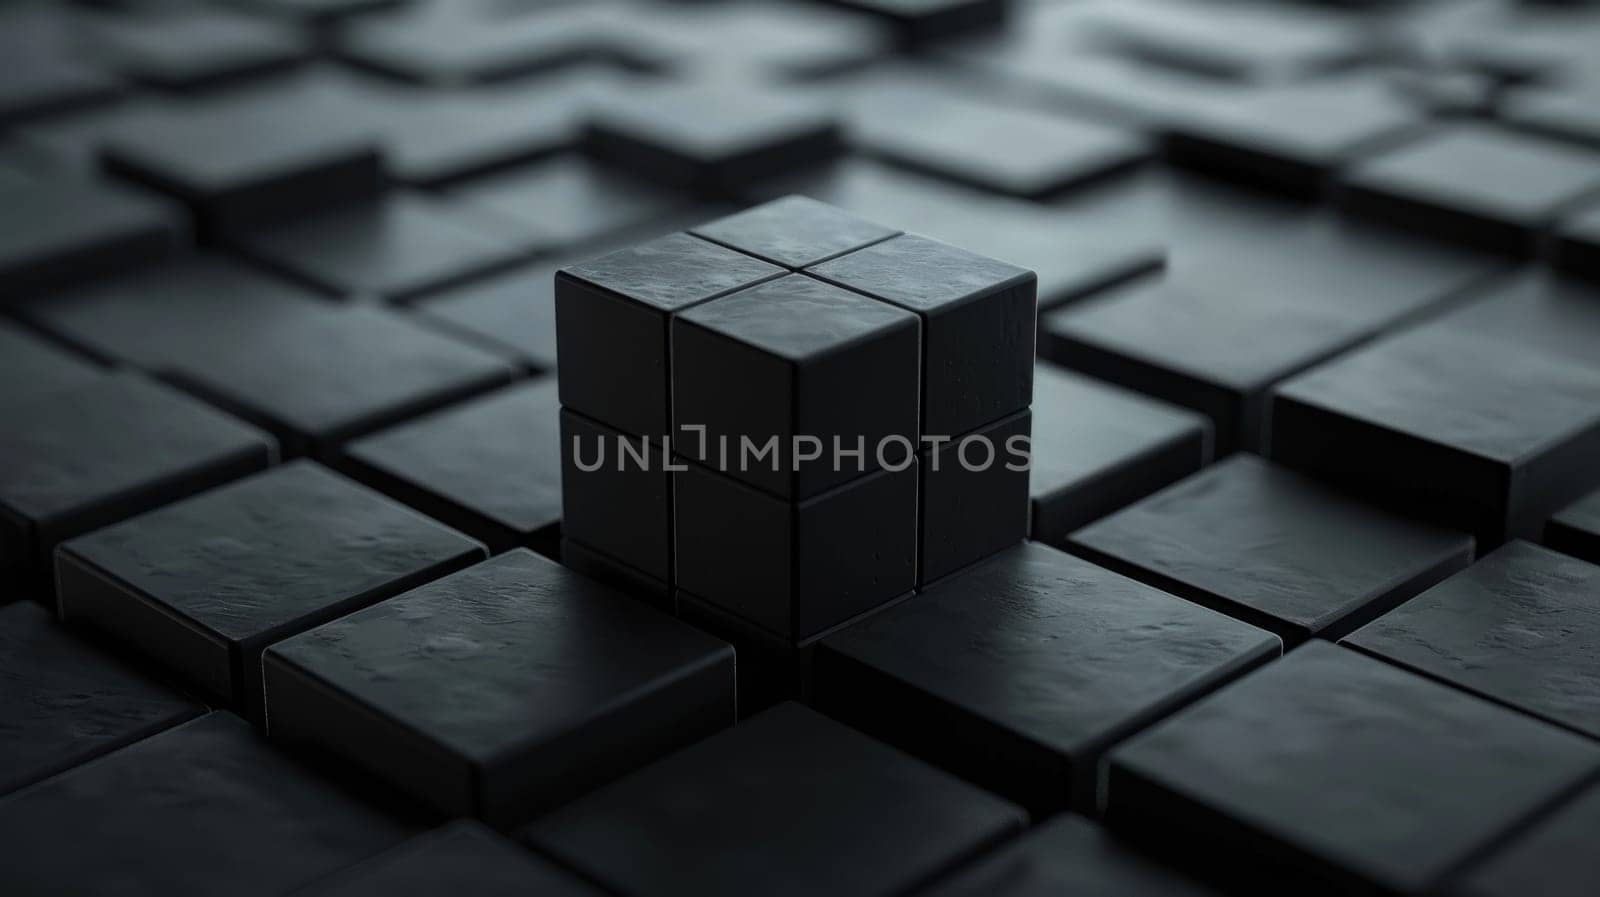 A black cube is placed on a black background. The cube is surrounded by many other black cubes, creating a pattern. The image has a minimalist and modern feel to it